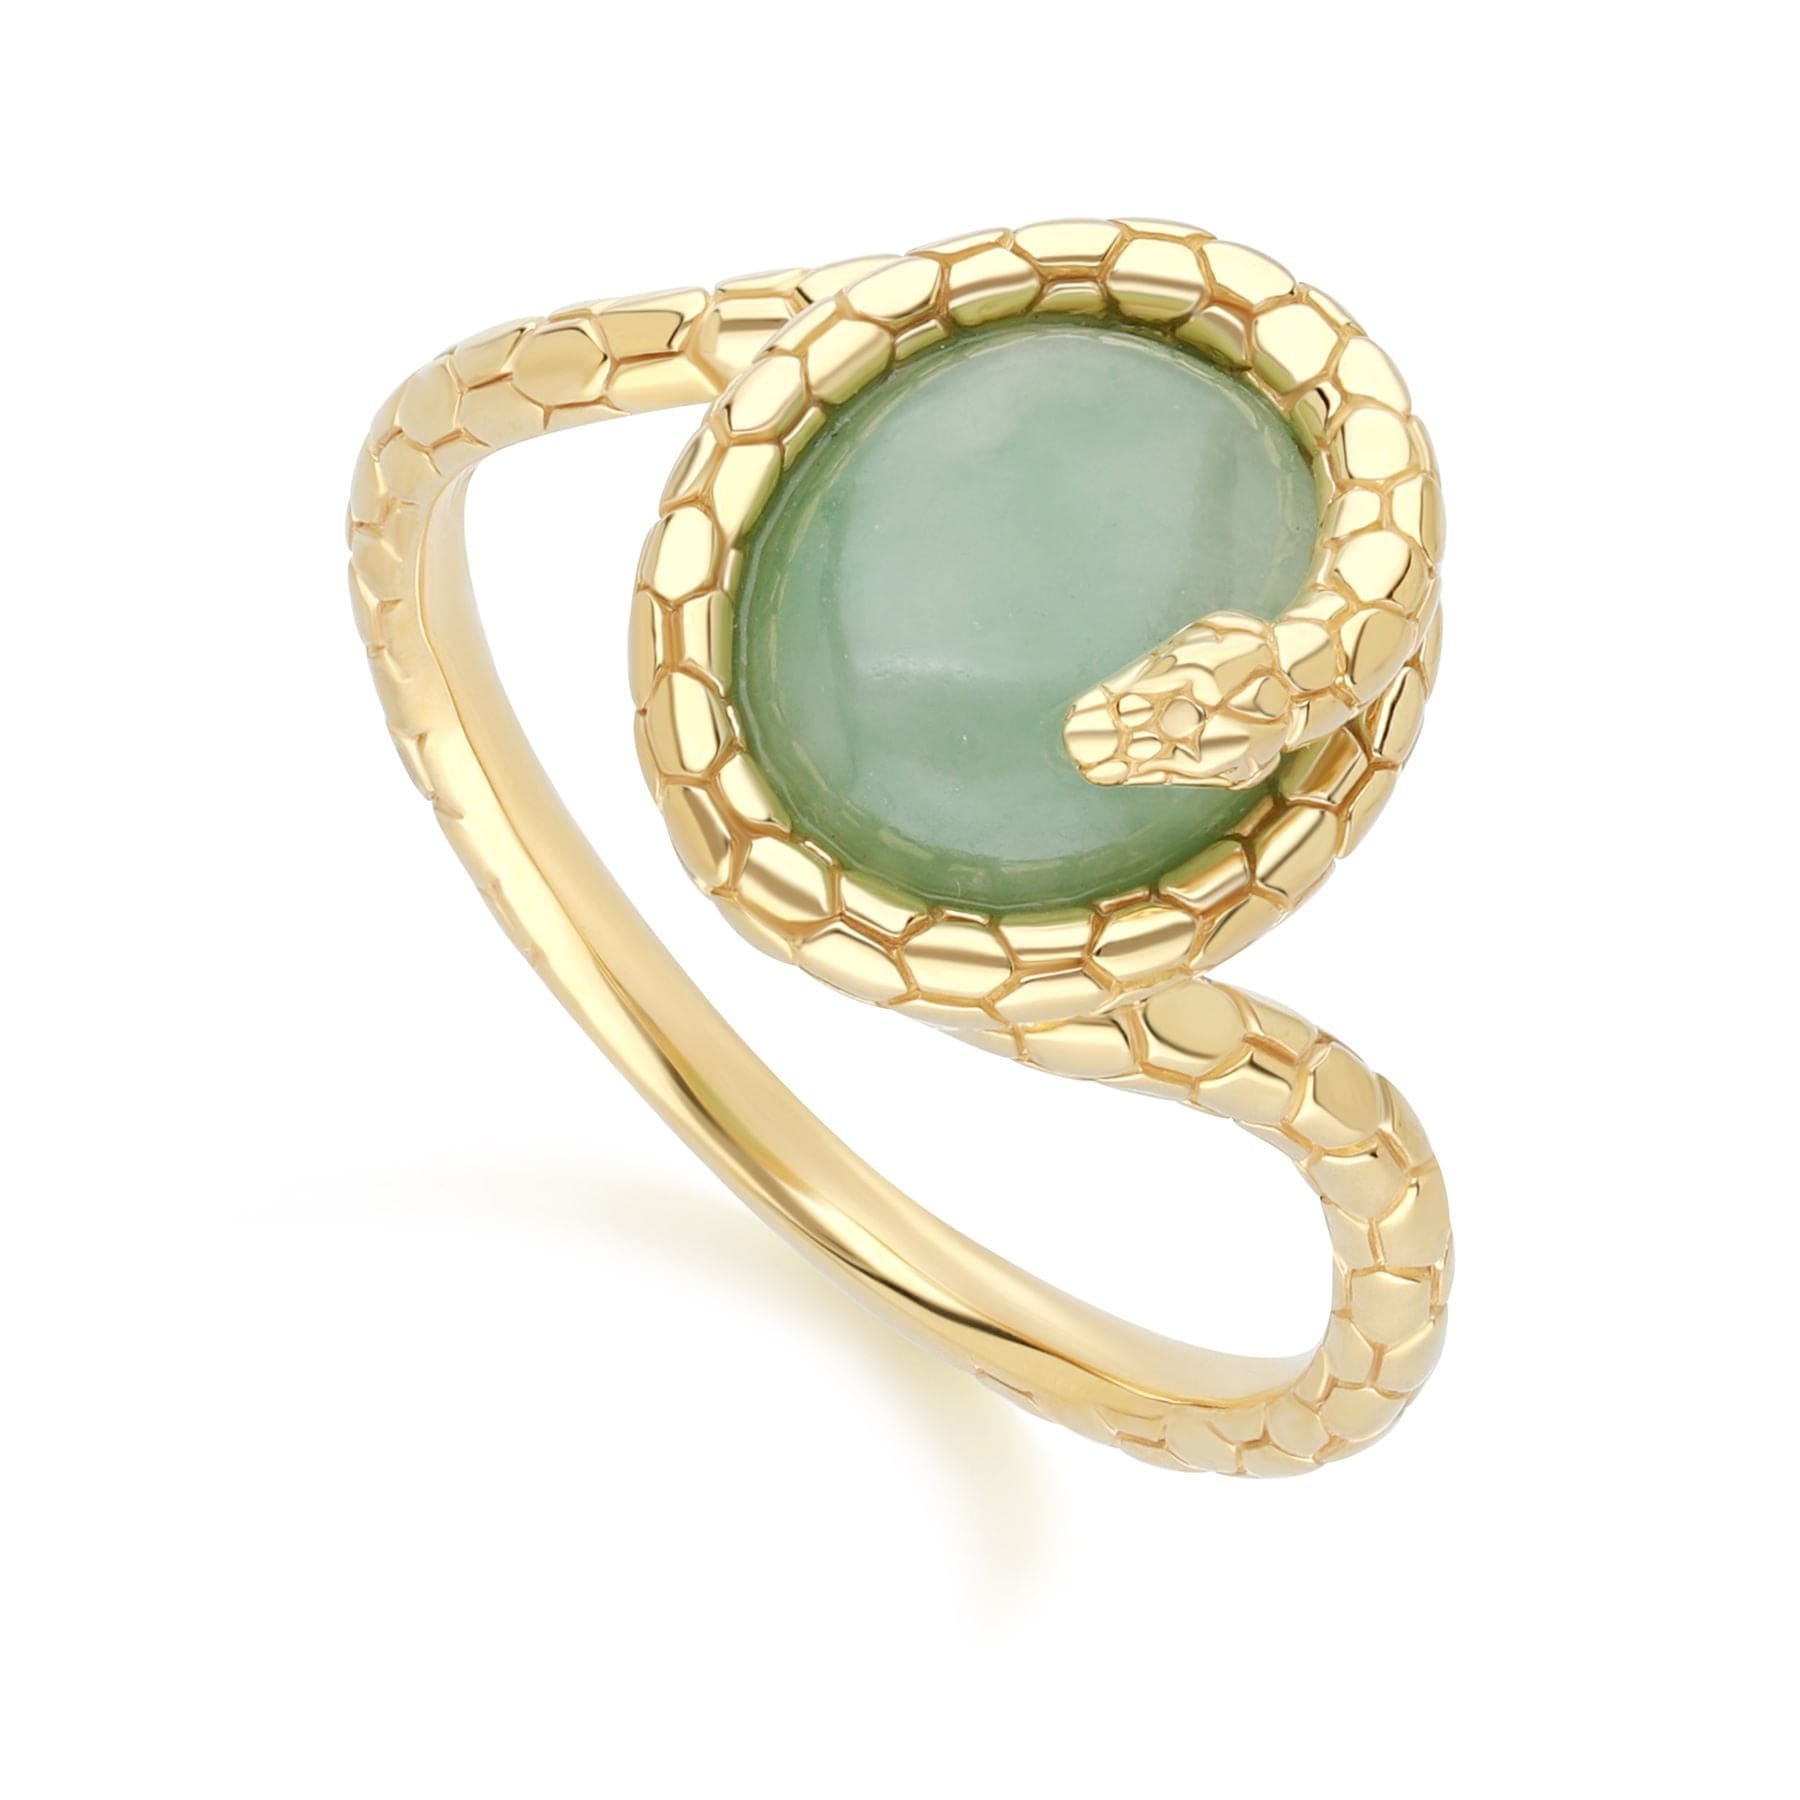 Image of ECFEW??? JADE WINDING SNAKE RING IN GOLD PLATED STERLING SILVER